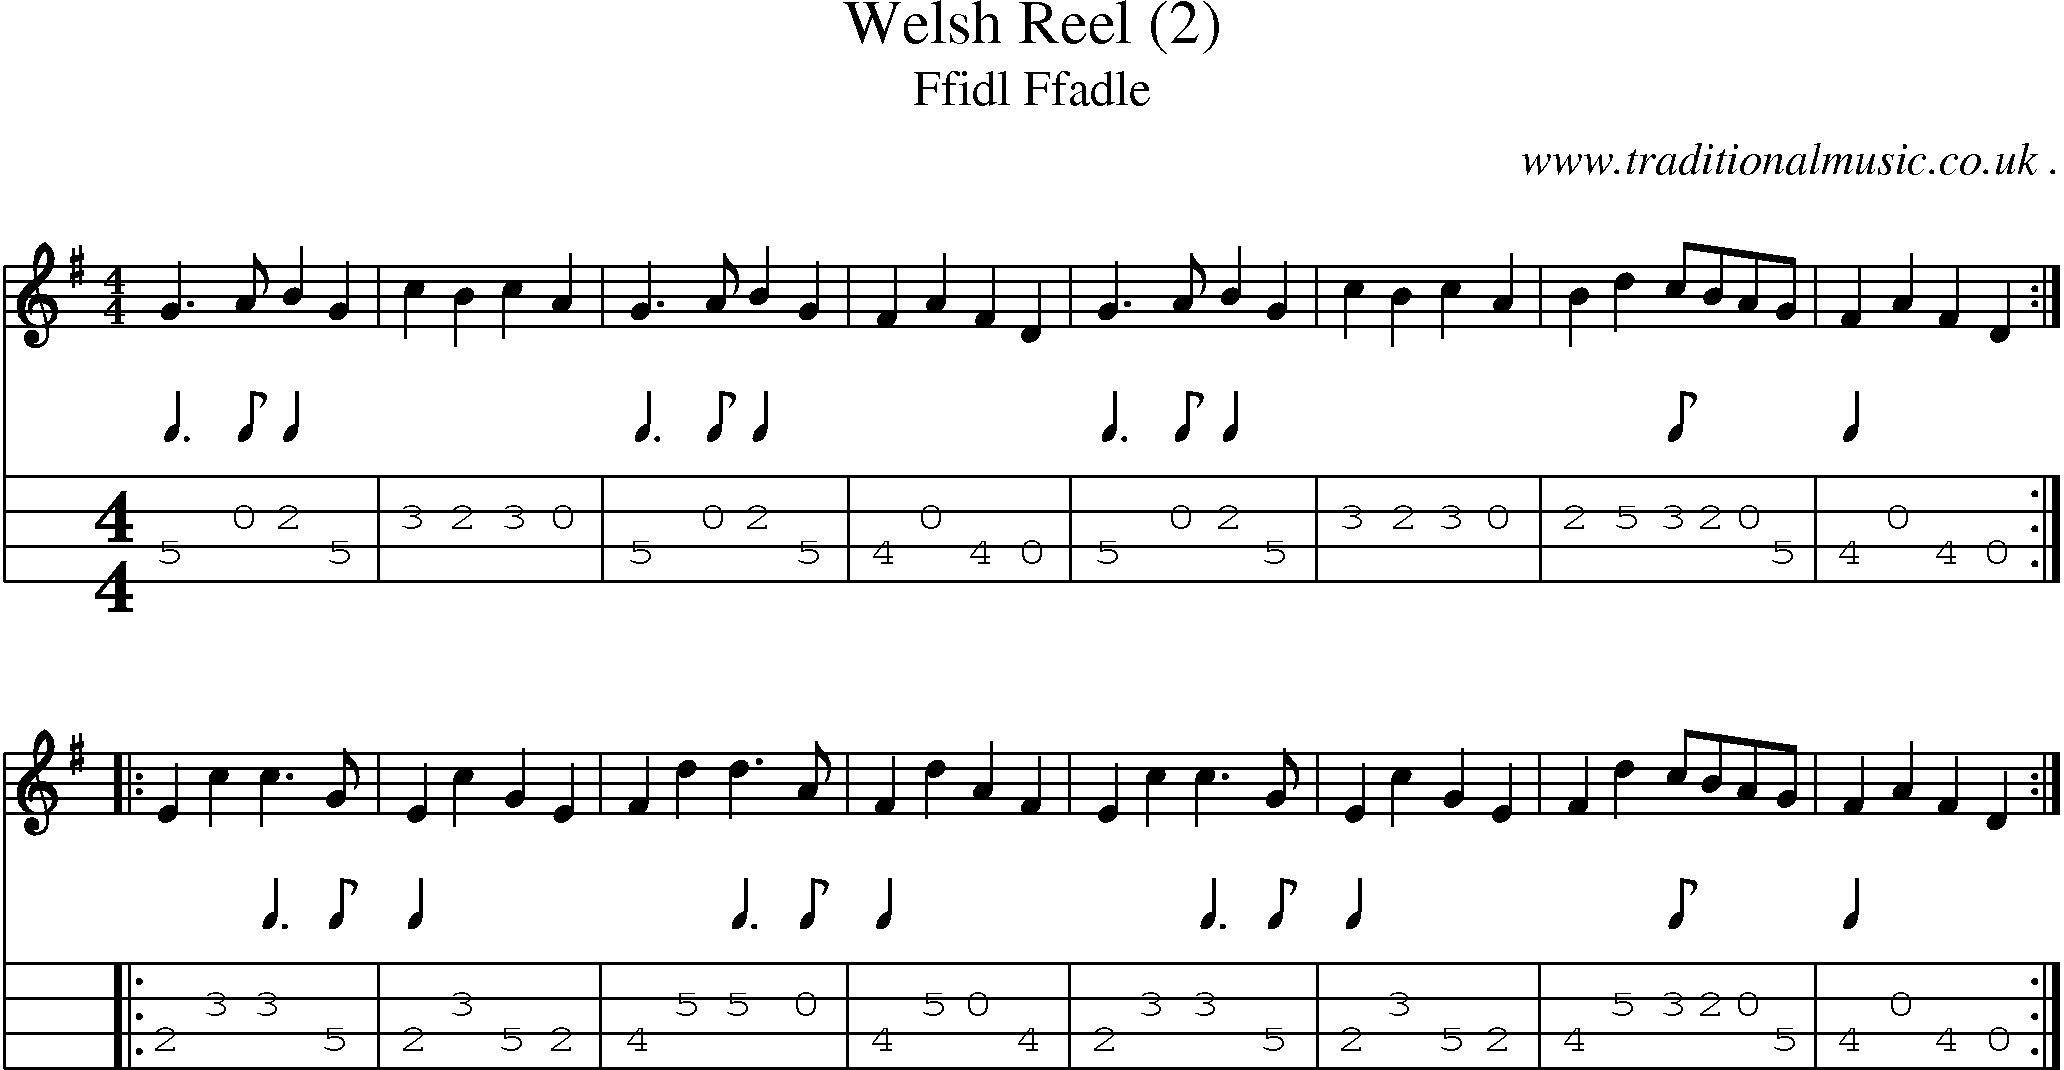 Sheet-Music and Mandolin Tabs for Welsh Reel (2)